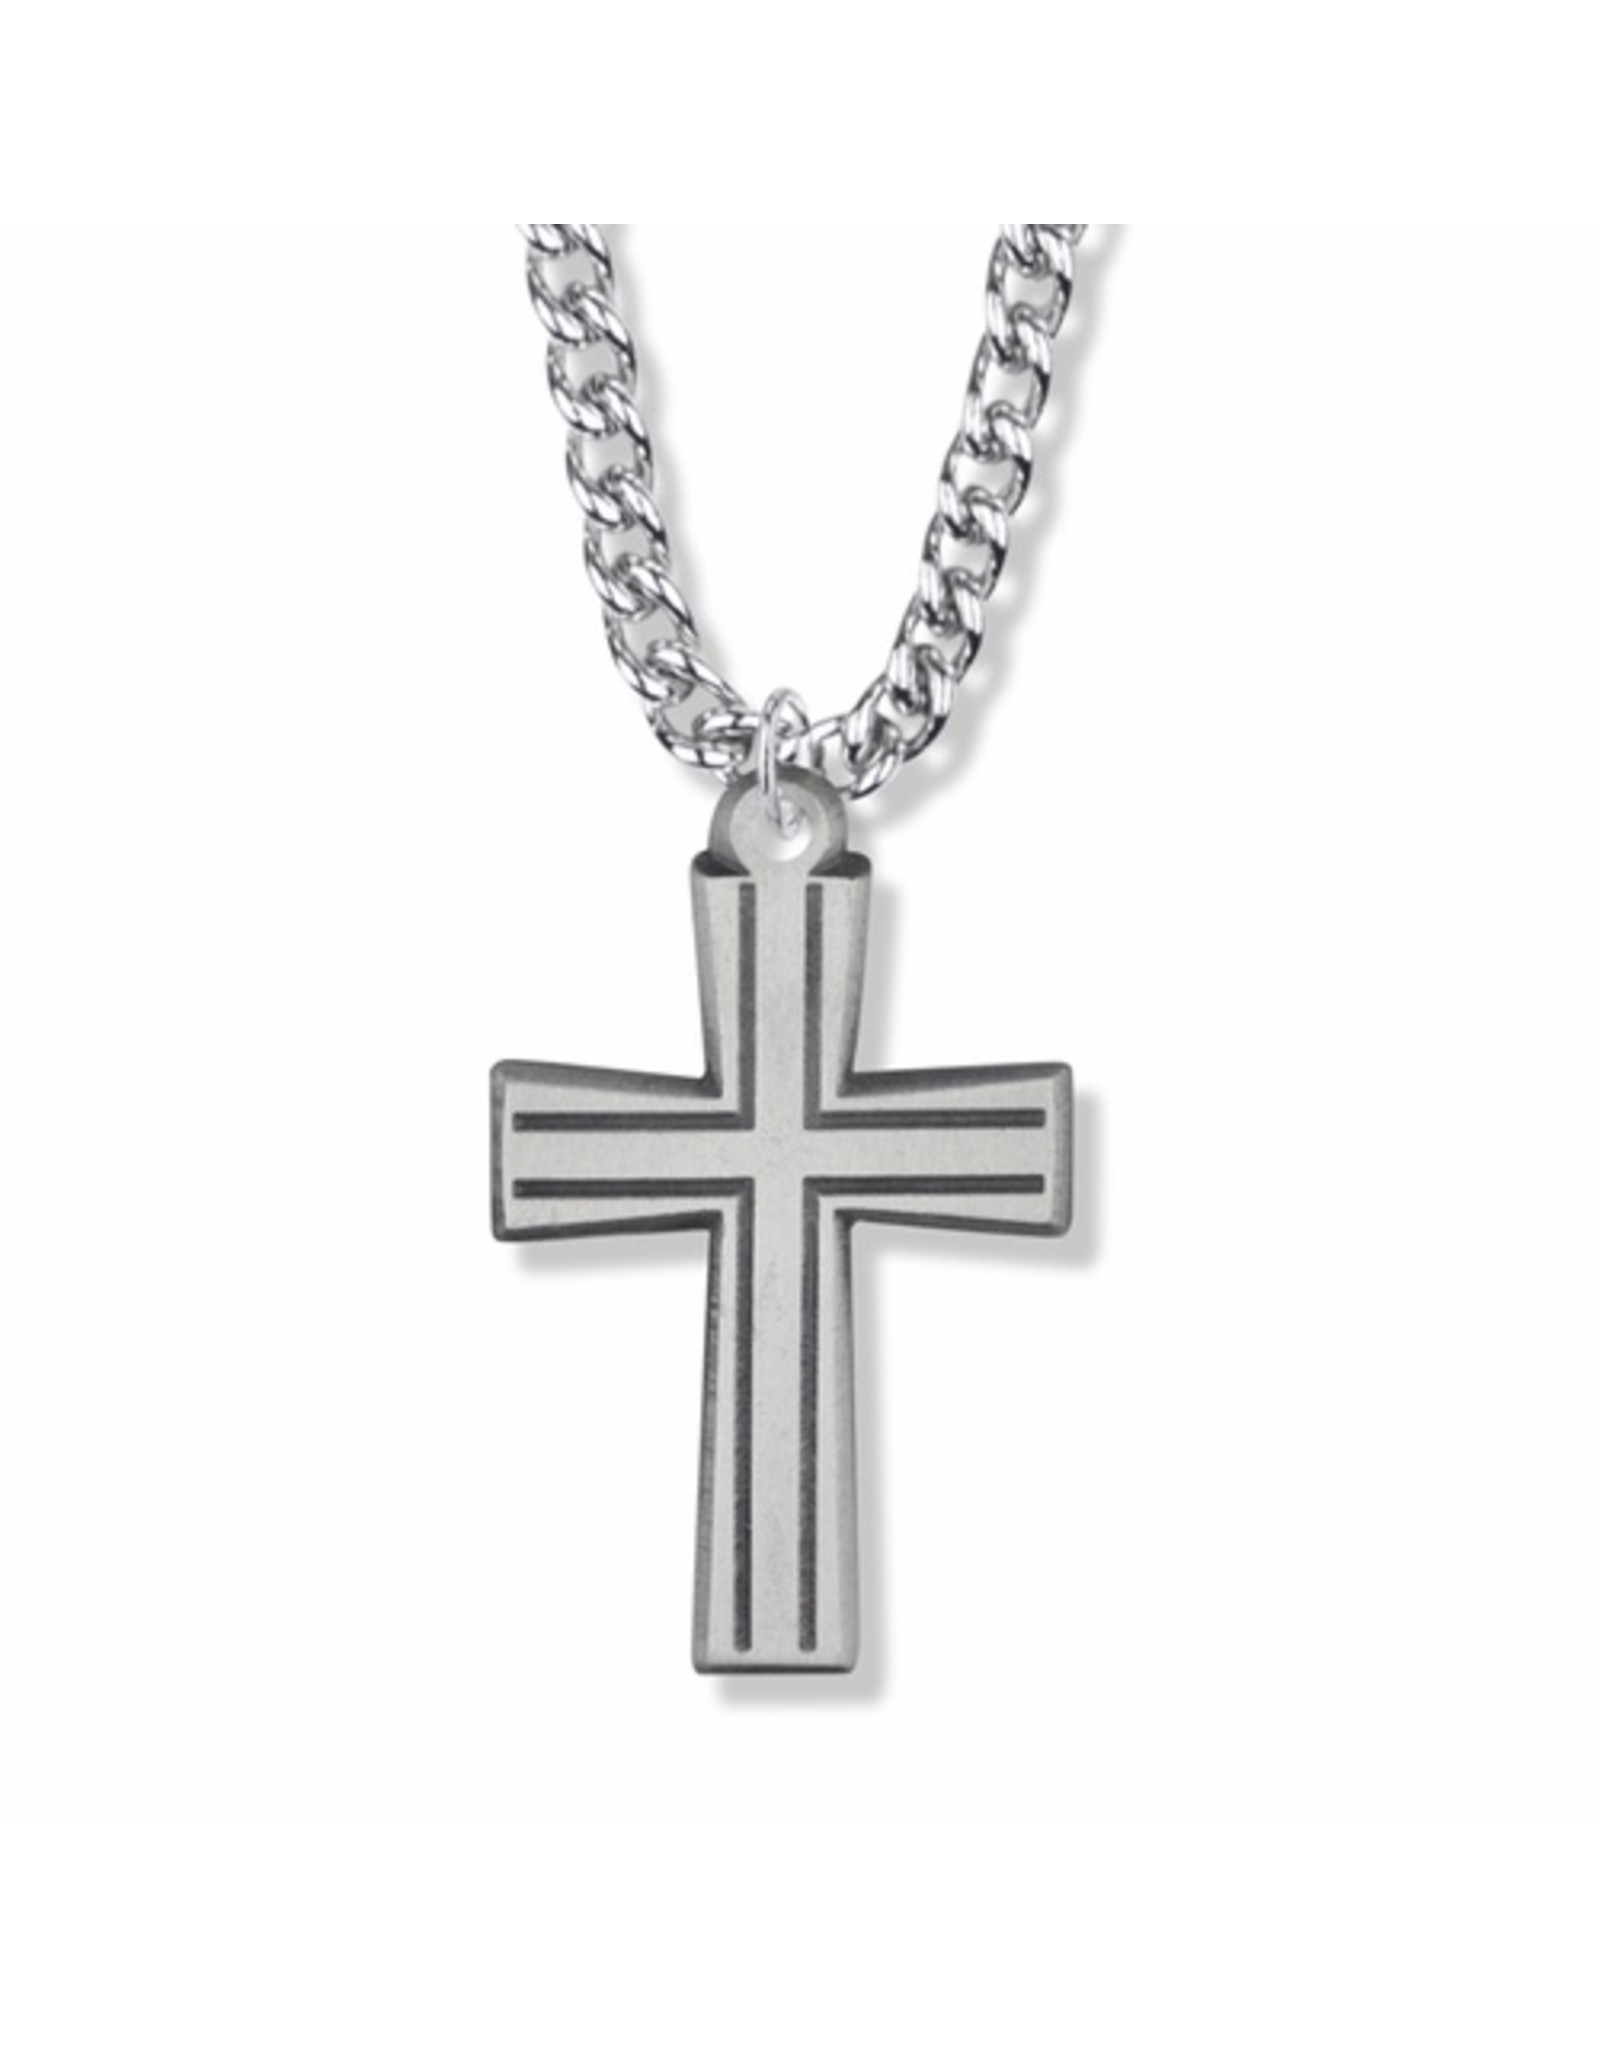 Singer Pewter Outlined and Flared Cross Necklace (24" Chain)